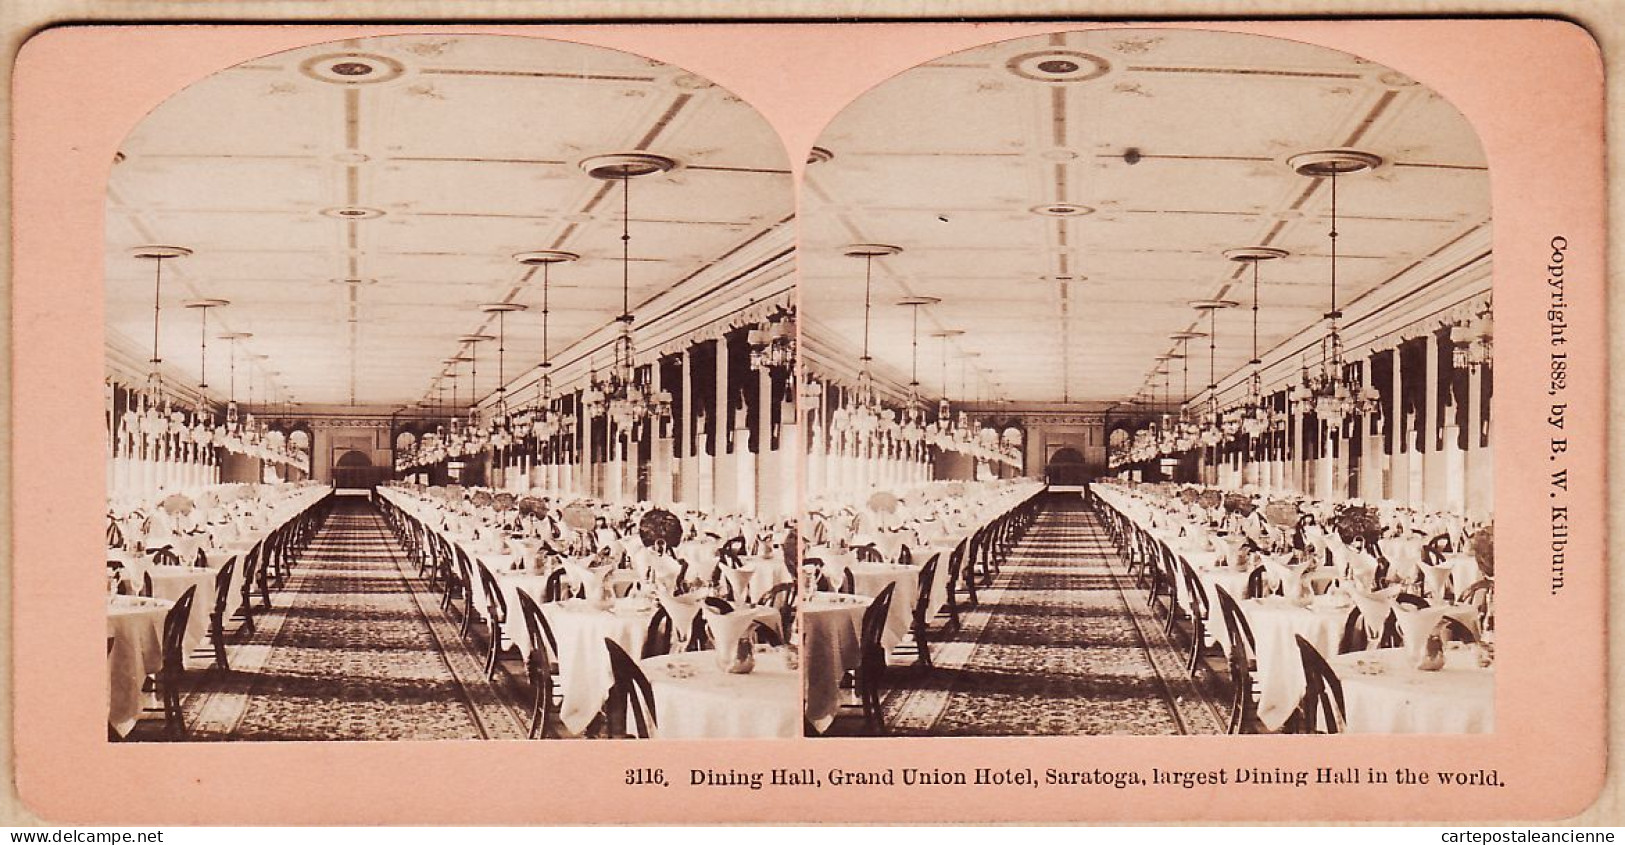 04585 / U.S.A KILBURN 1882 SARATOGA HOTEL GRAND UNION Dining Hall Largest Dining Hall In The World Photo Stereoview 3116 - Stereoscoop